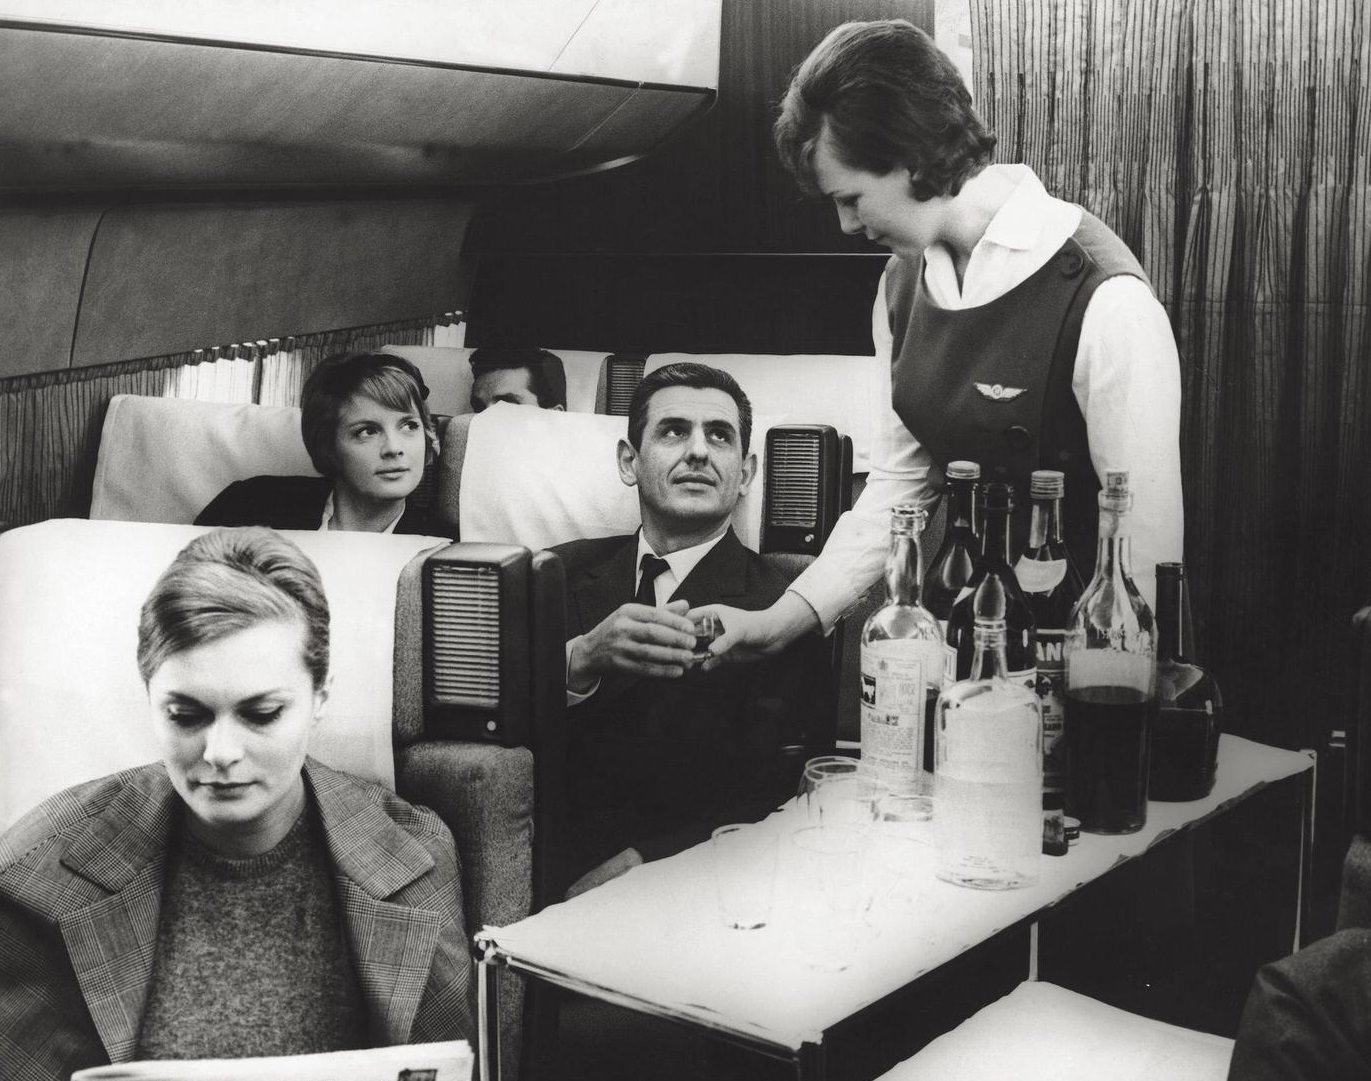 Air hostess offering drinks to passengers on board plane. 1960s.